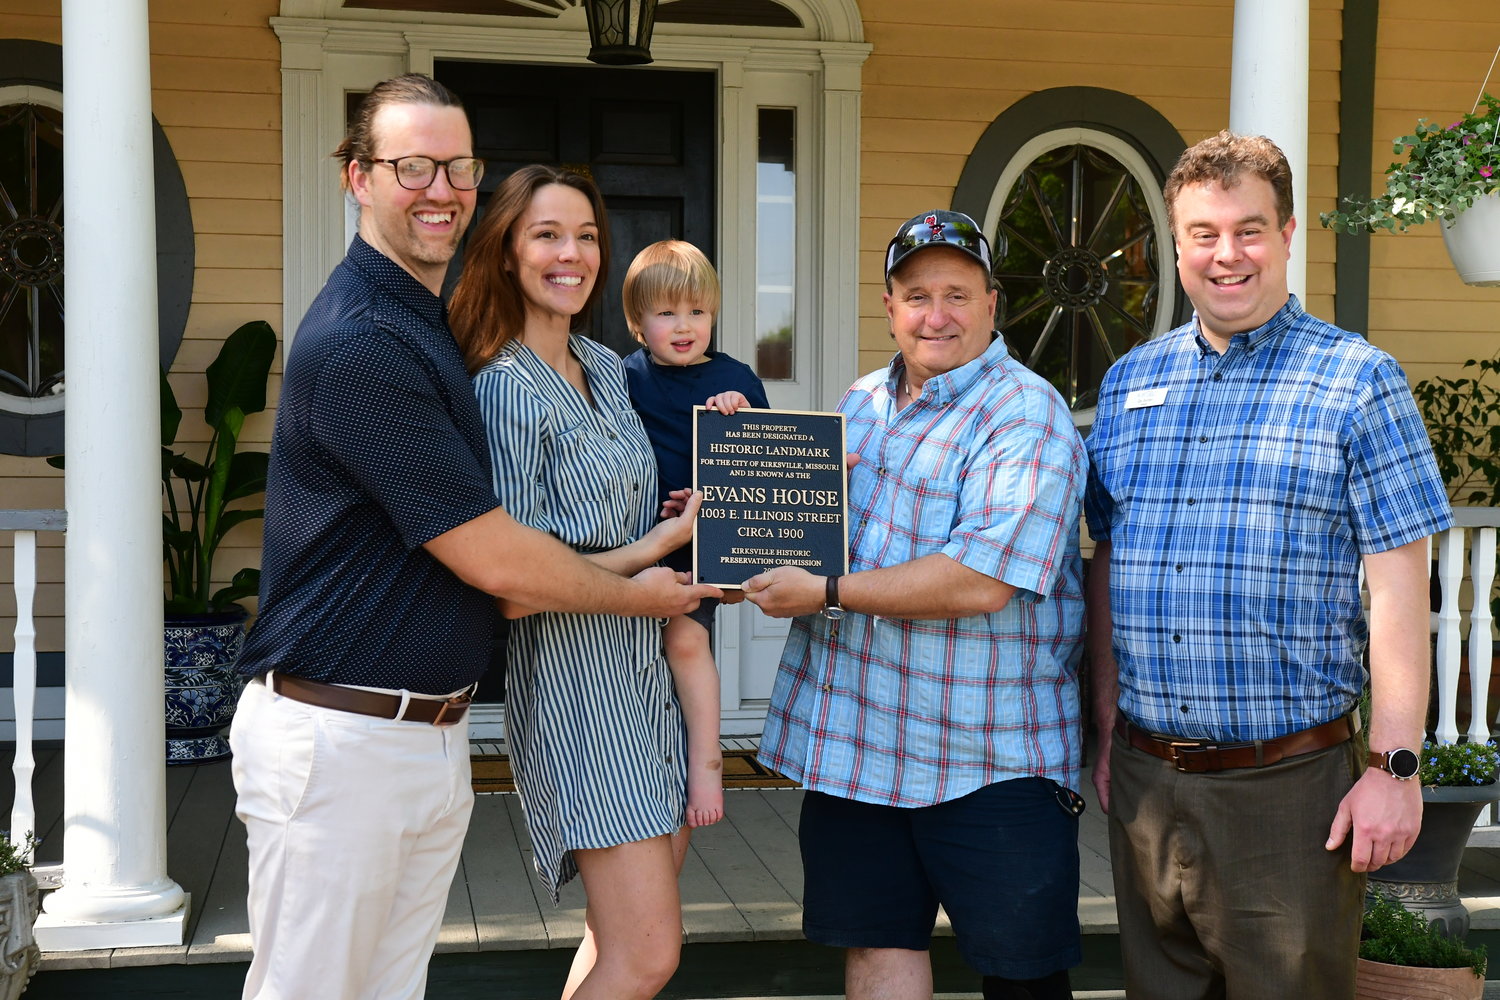 Nate, Nichelle and Otto Chastain pose alongside Bob Giovannini, chair of the Kirksville Historic Preservation Commission, and Kirksville Mayor Zac Burden. The Chastain's home at 1003 E. Illinois Street has received historic landmark by the city. The plaque was given during a ceremony on May 13, 2022.